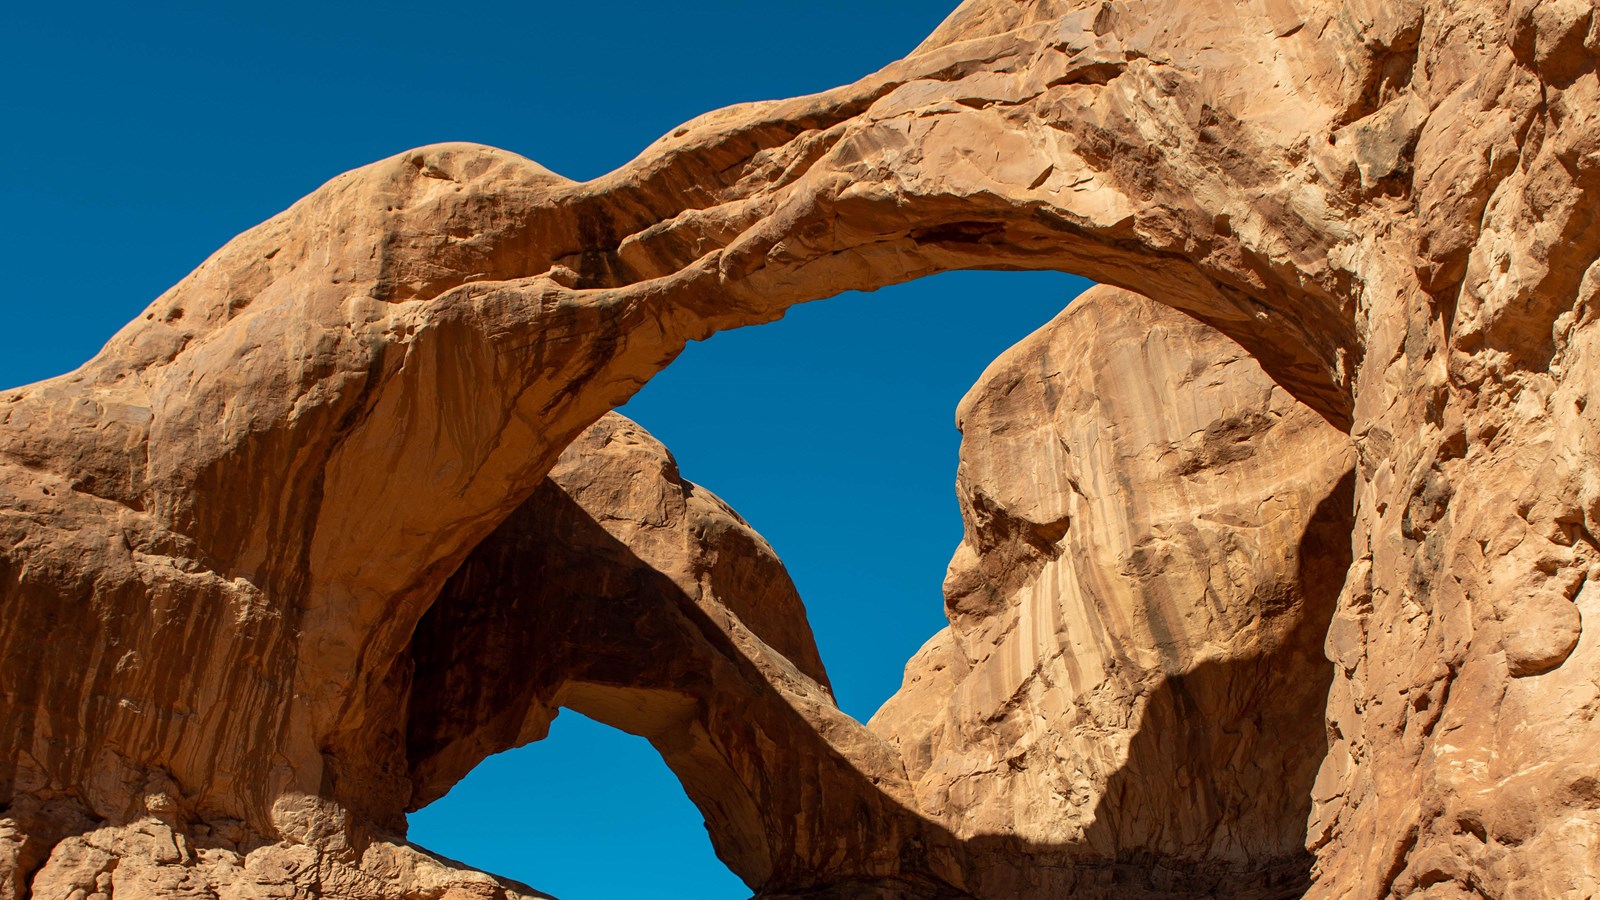 Two sandstone arches connected on the left against a backdrop of blue sky. 